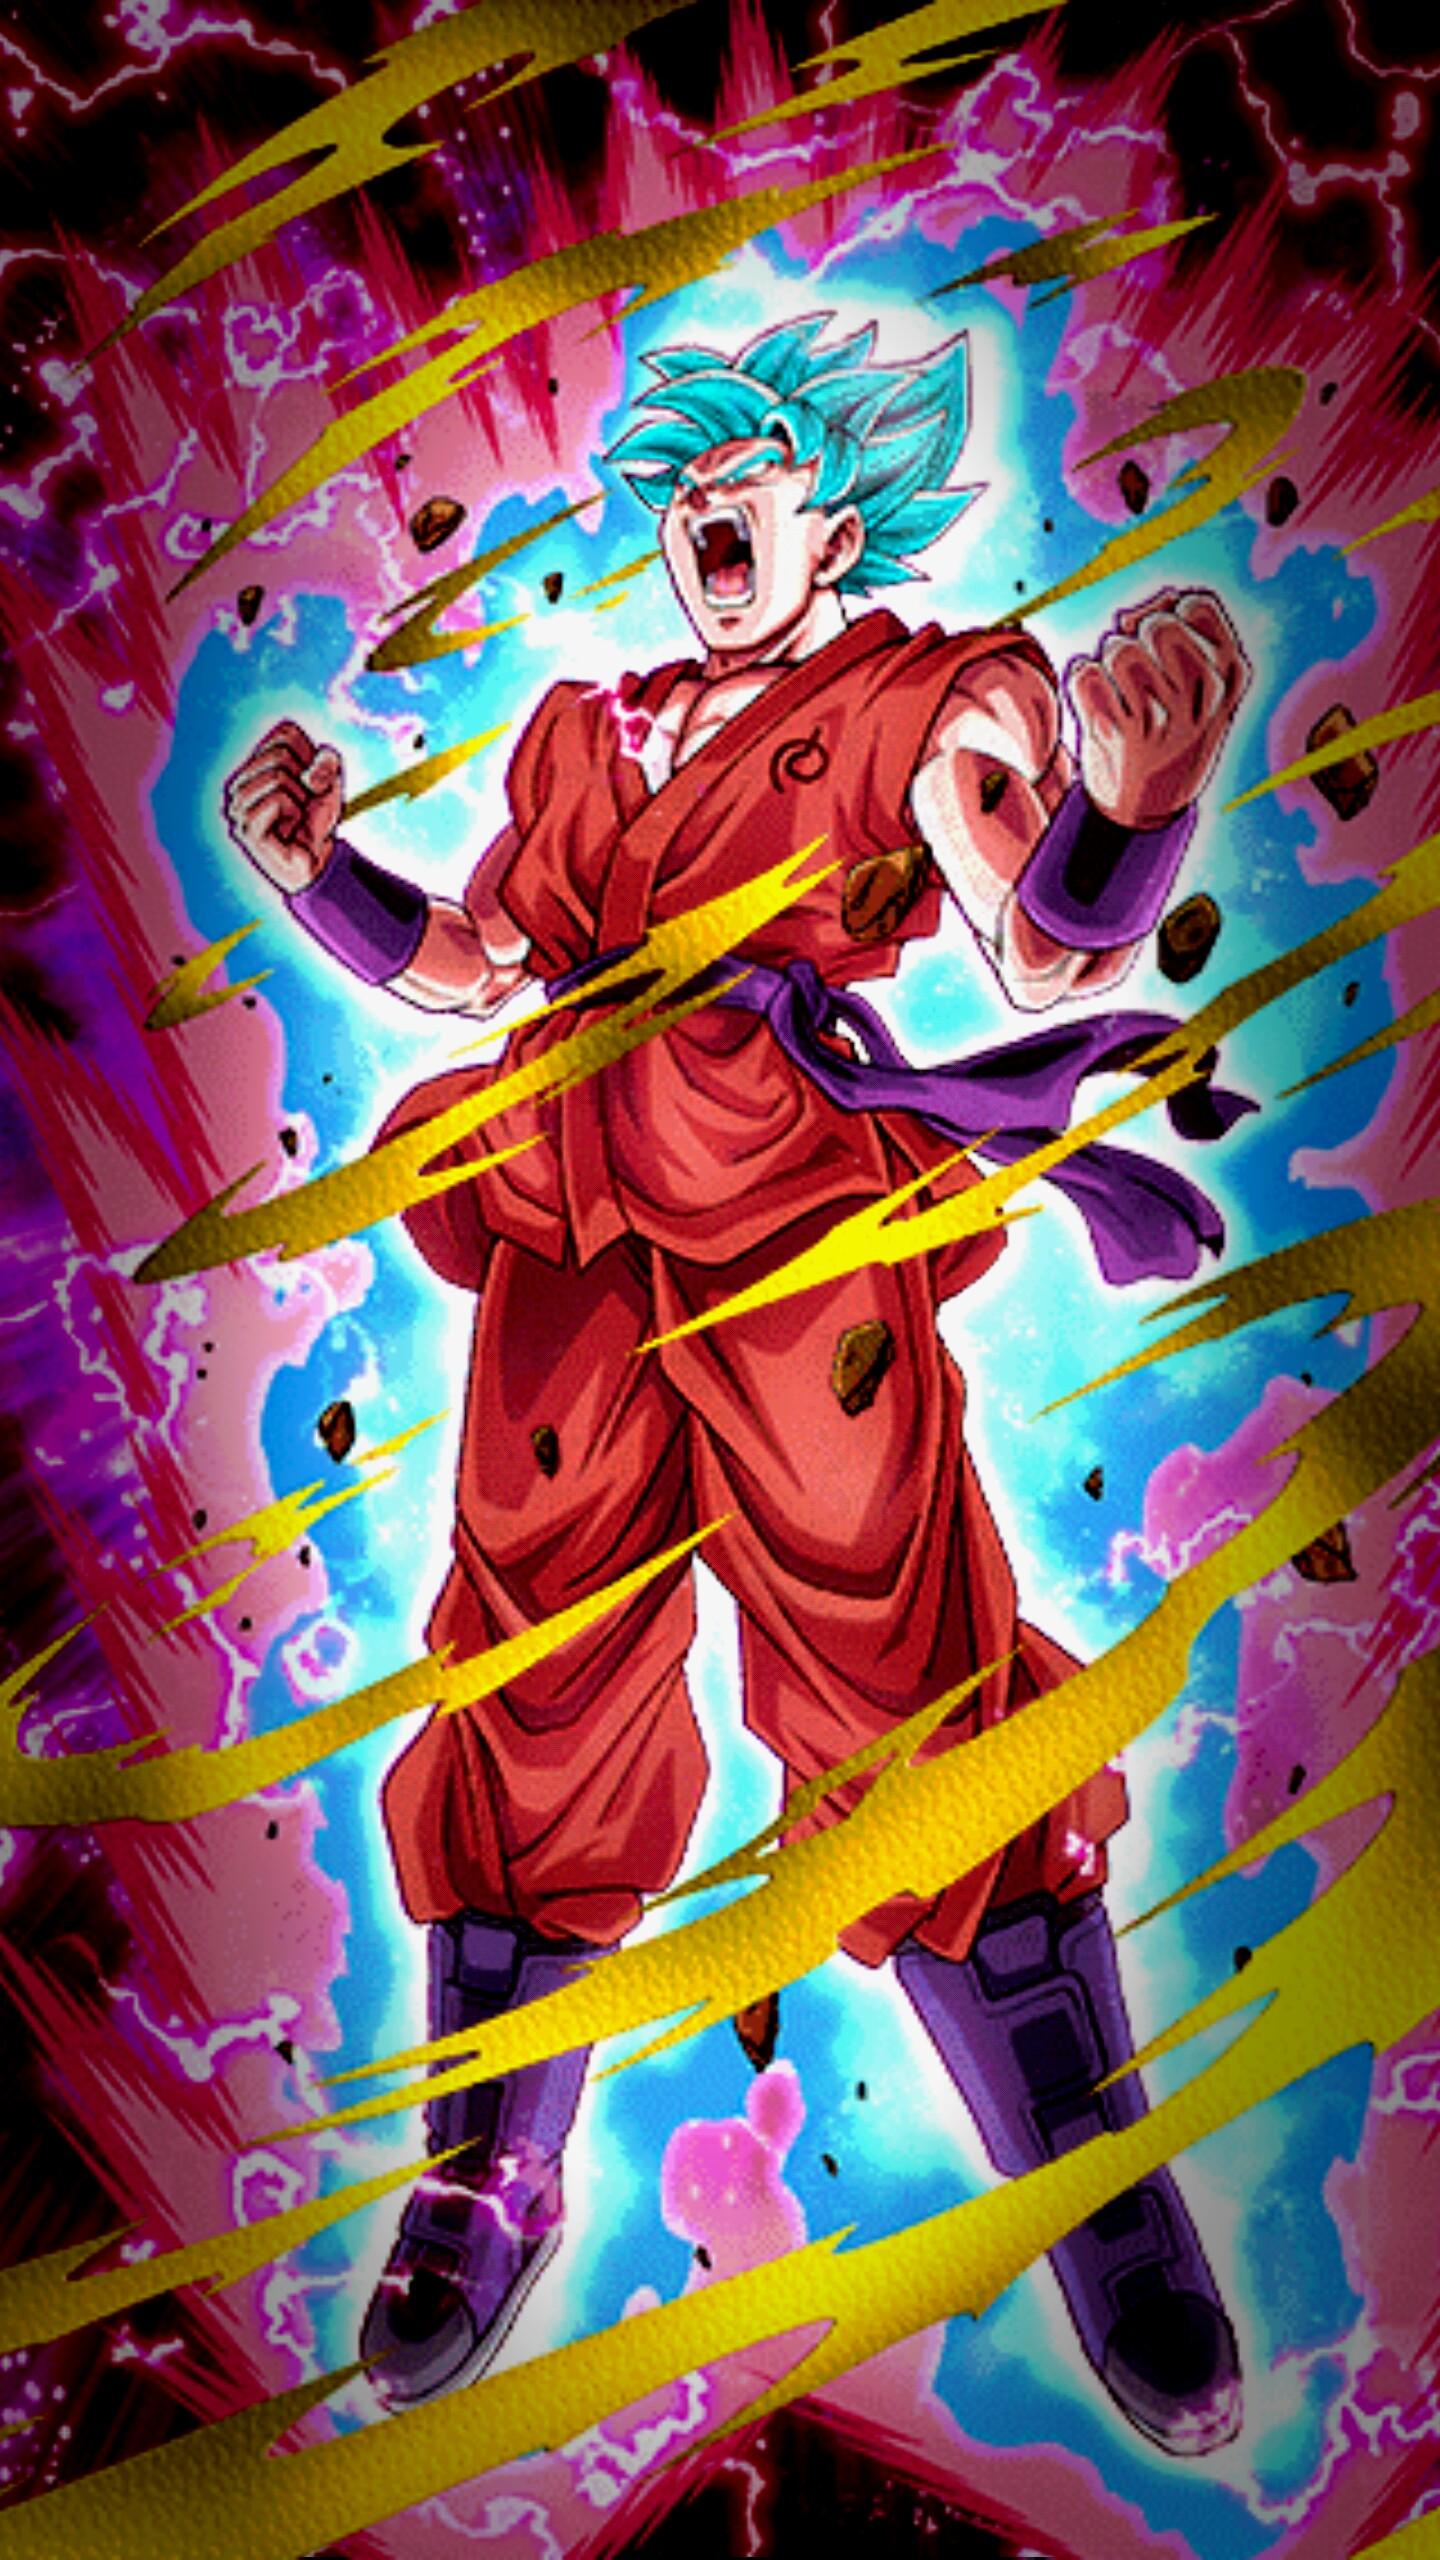 SSBKK Goku wallpaper modded to my liking maybe yours too